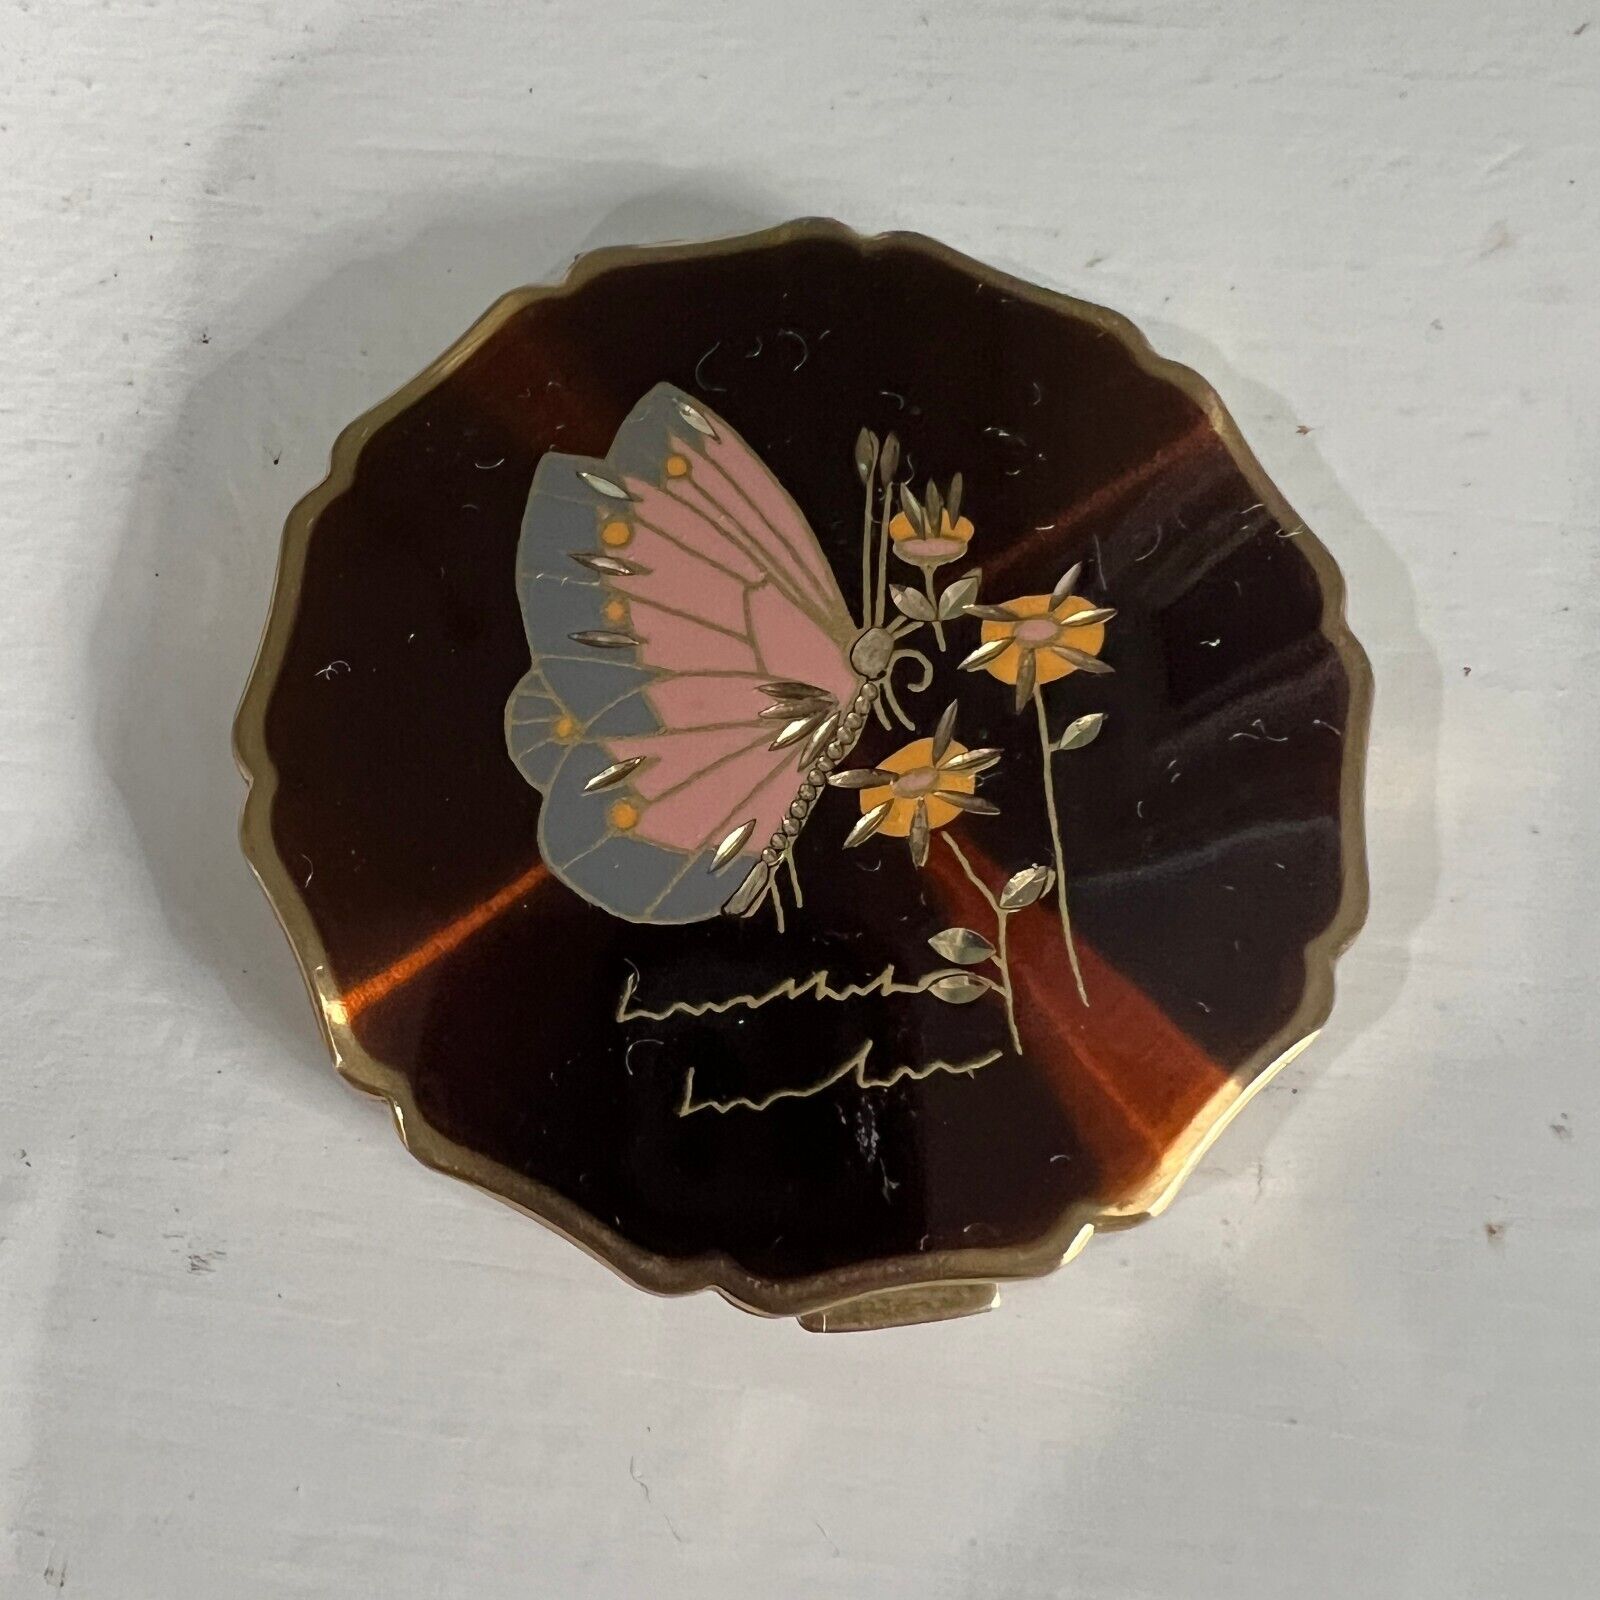 Vintage Stratton Compact Made in England Butterfly Themed Powder Hand Engraved